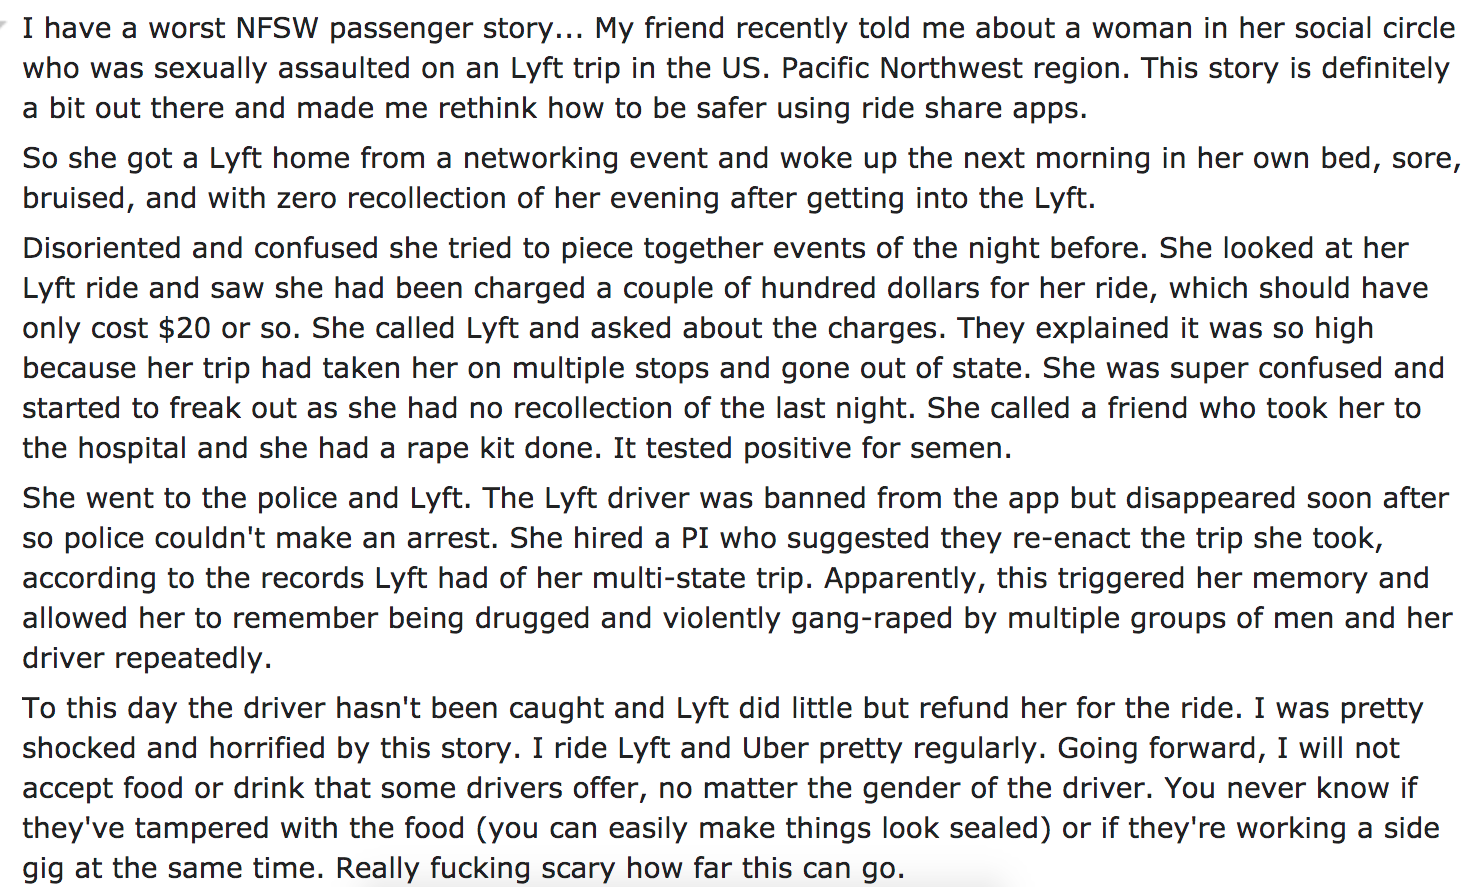 ask reddit - I have a worst Nfsw passenger story... My friend recently told me about a woman in her social circle who was sexually assaulted on an Lyft trip in the Us. Pacific Northwest region. This story is definitely a bit out there and made me rethink